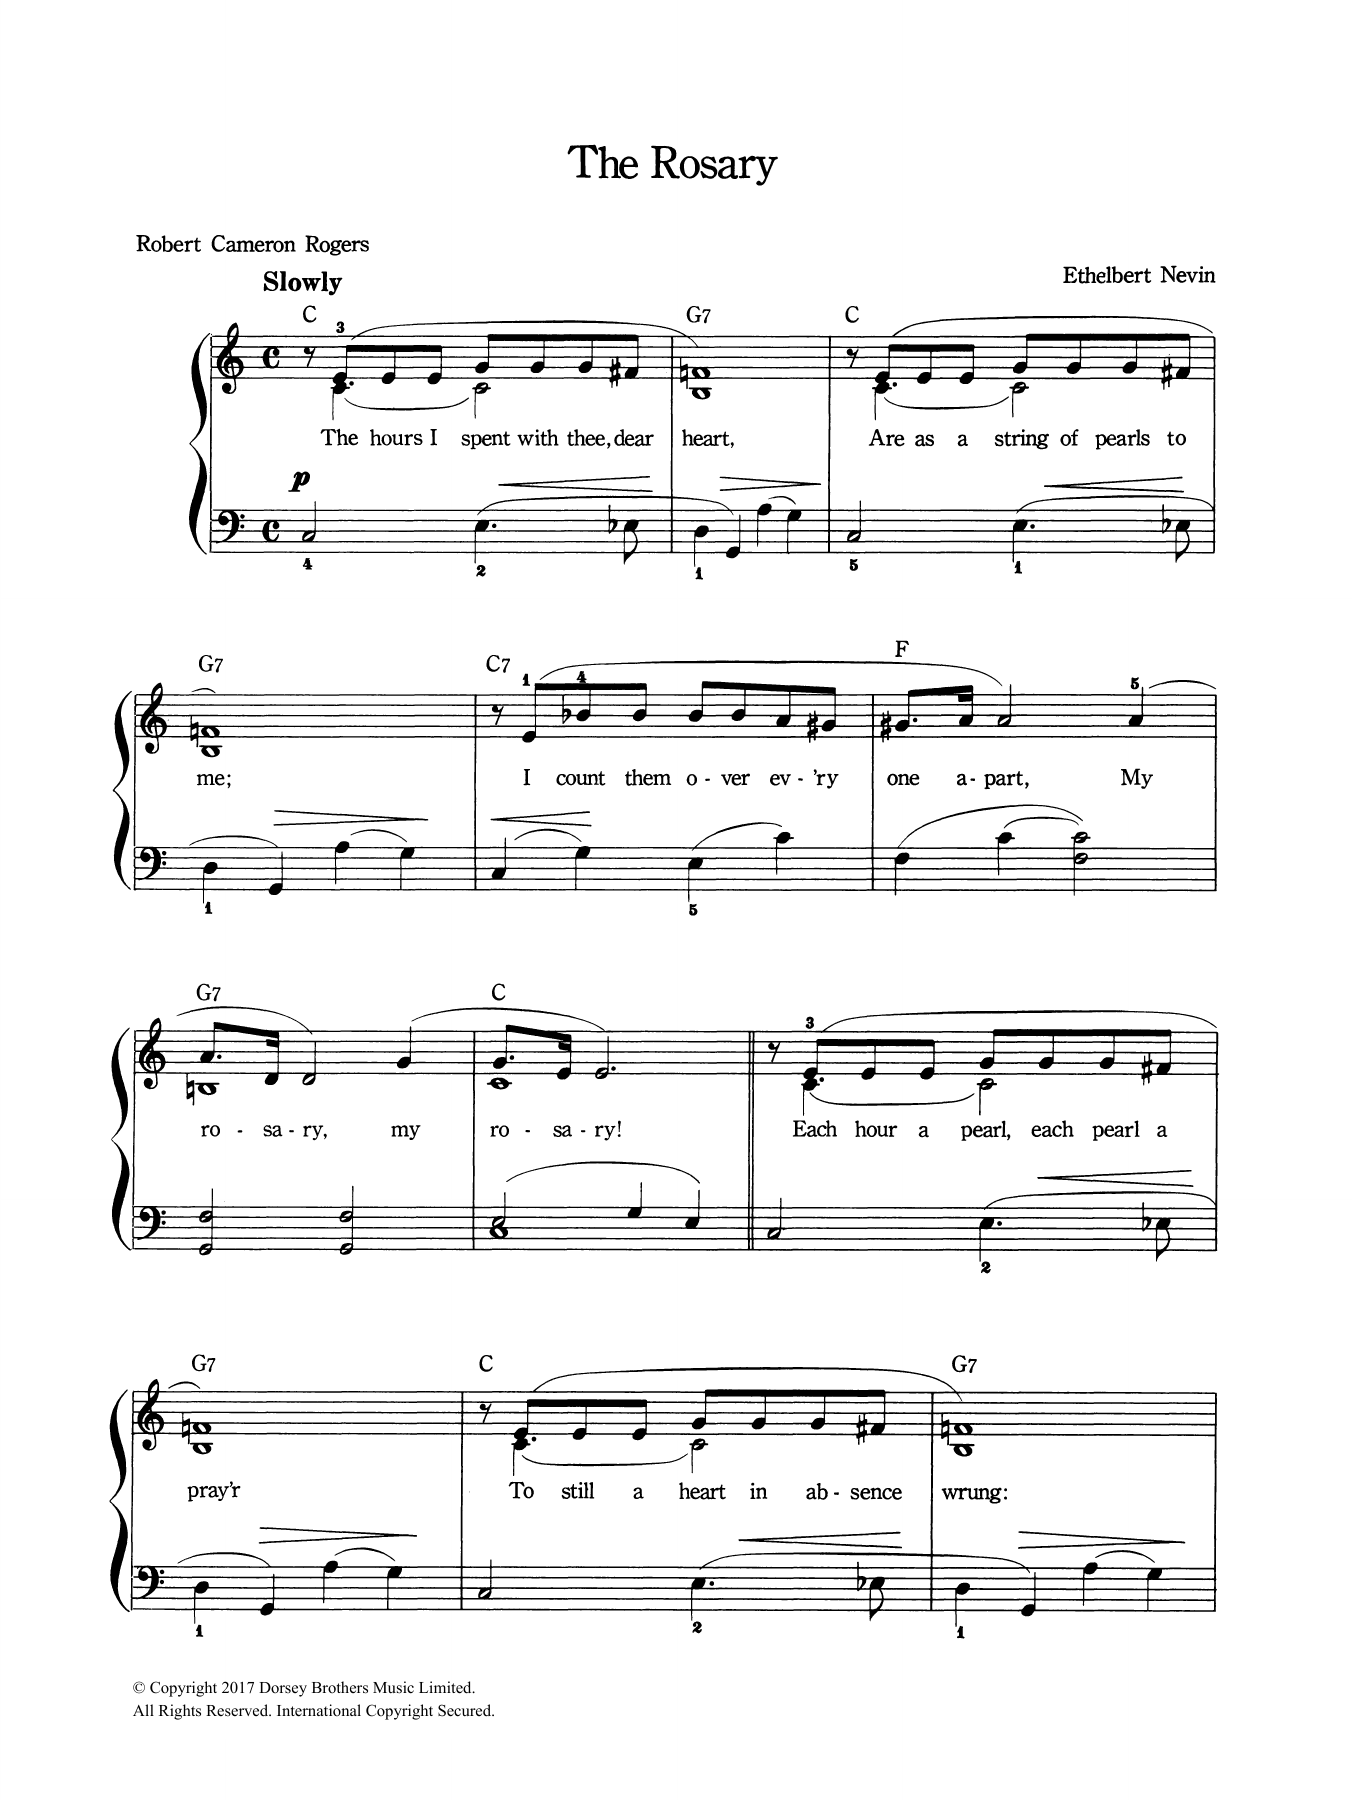 Download Ethelbert Nevin The Rosary Sheet Music